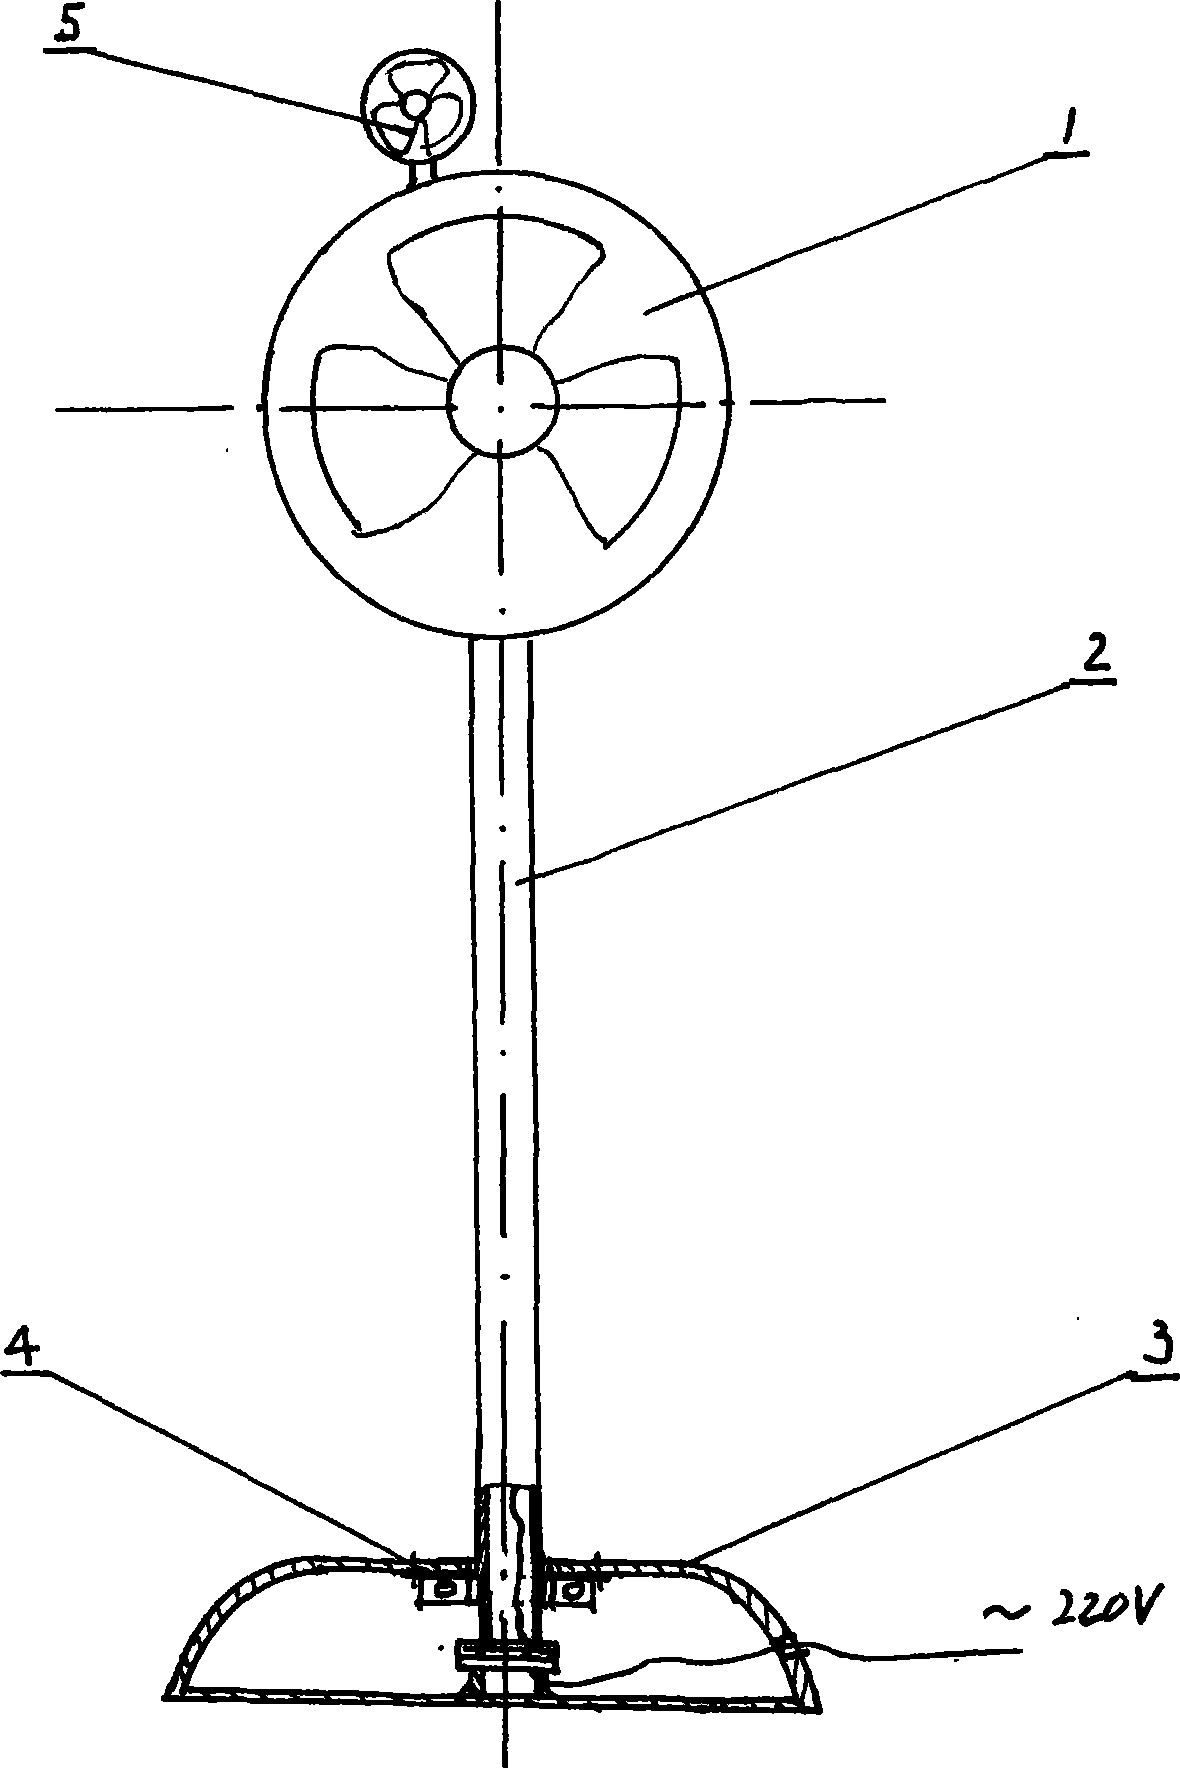 Electric fan with full wind direction